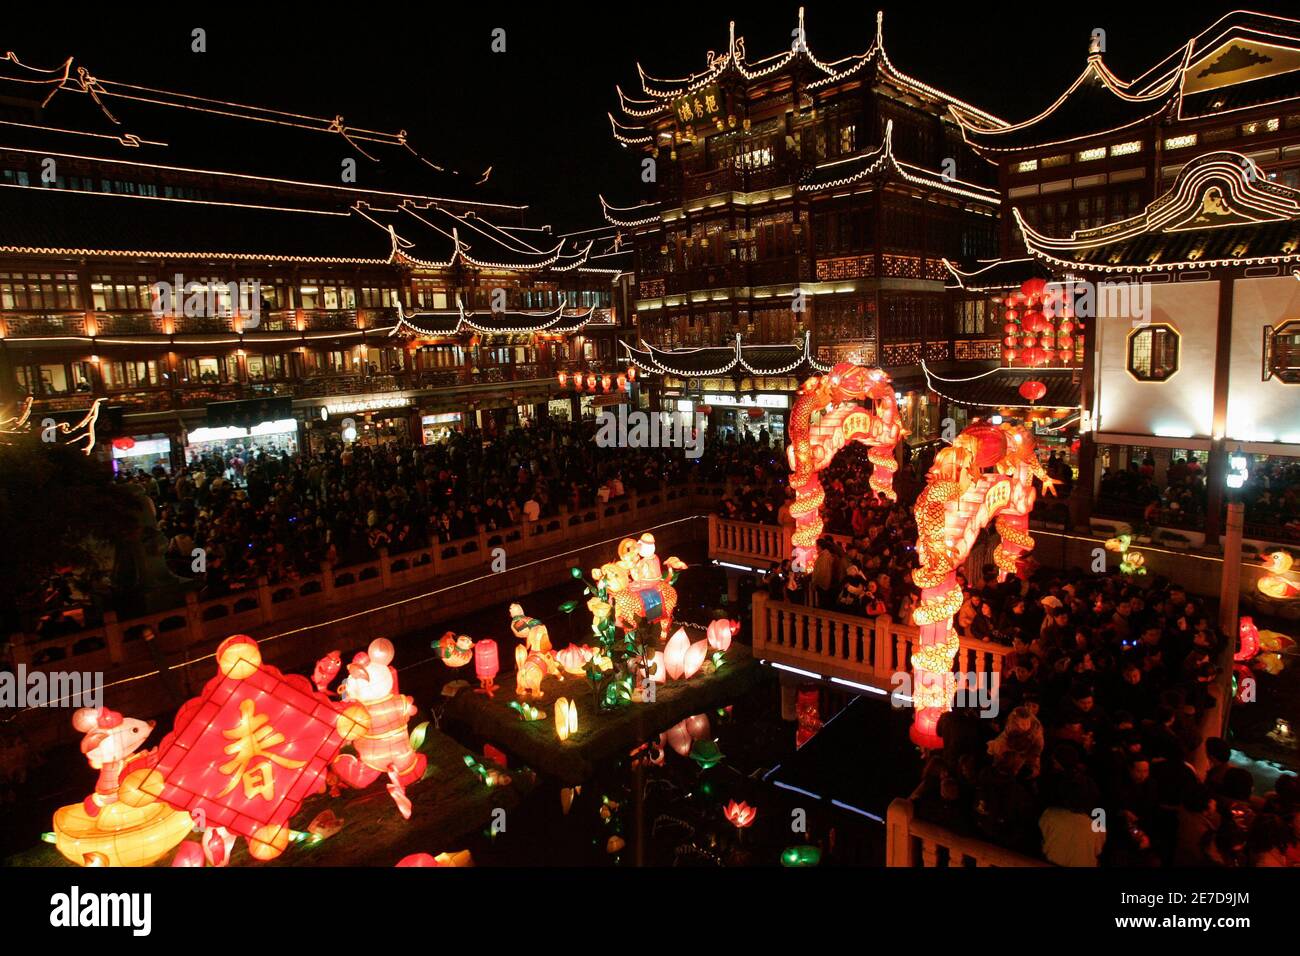 Visitors walk around the Yu Gardens, decorated with special decorations for the last day of the Chinese New Year, in Shanghai February 21, 2008. The last day of the Chinese New Year, known as the Lantern Festival, is celebrated today. REUTERS/Aly Song (CHINA) Stock Photo